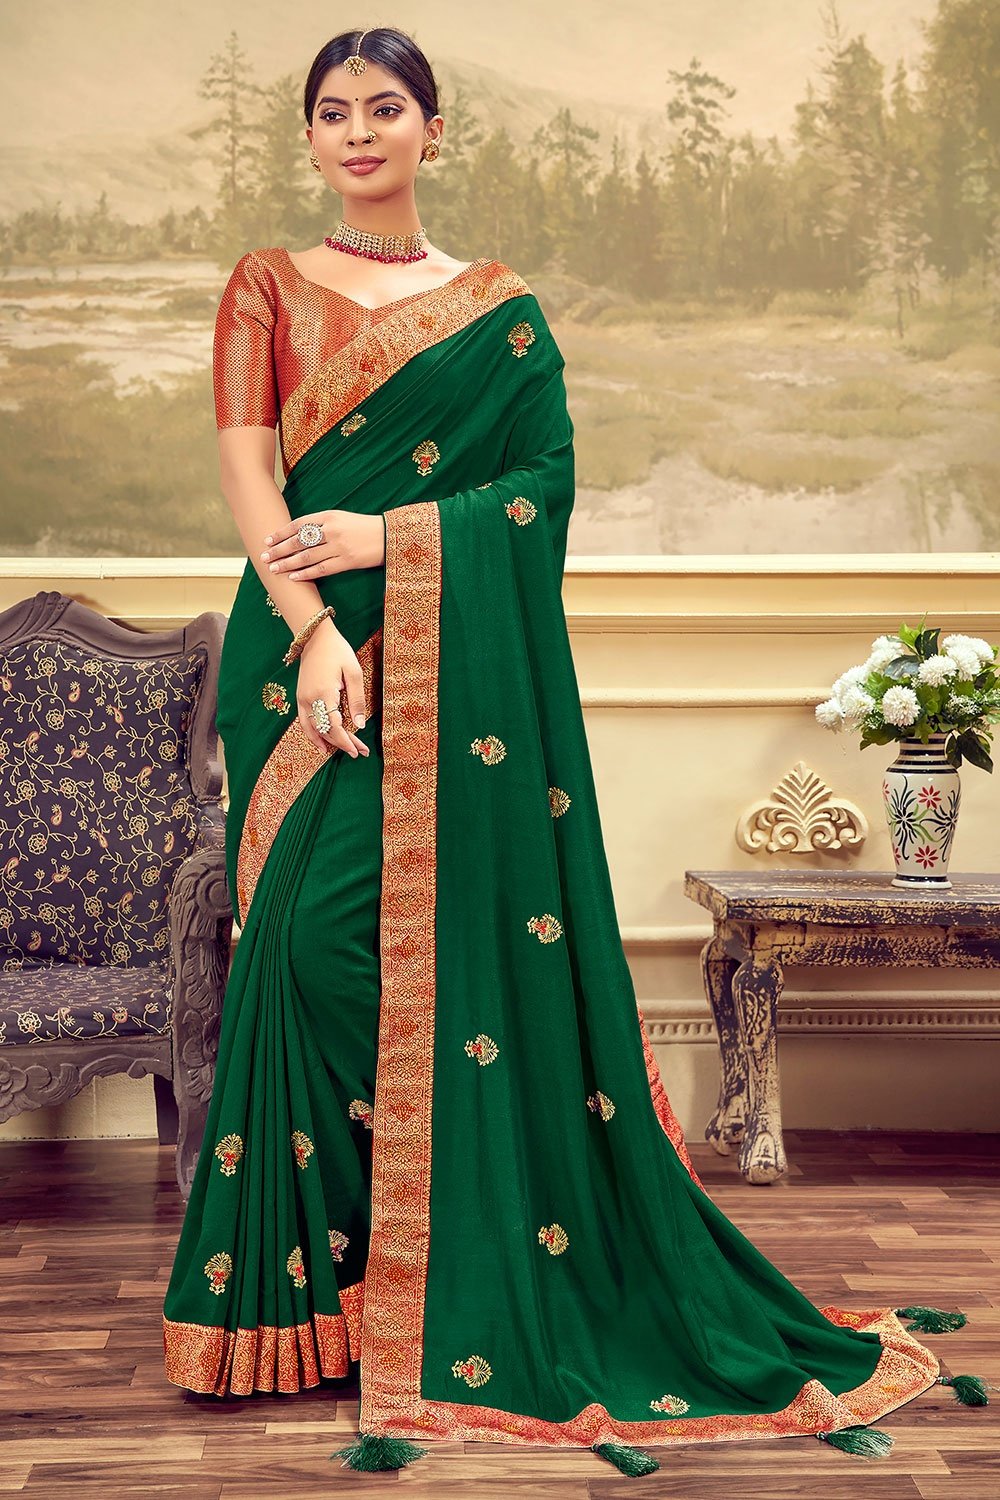 Buy Latest Collection of Sarees Below 2000 Online at Best Price - Online  Shopping india | Buy Designer sarees, salwar suits, lehenga, kurti ,gowns  and more - grabandpack.com